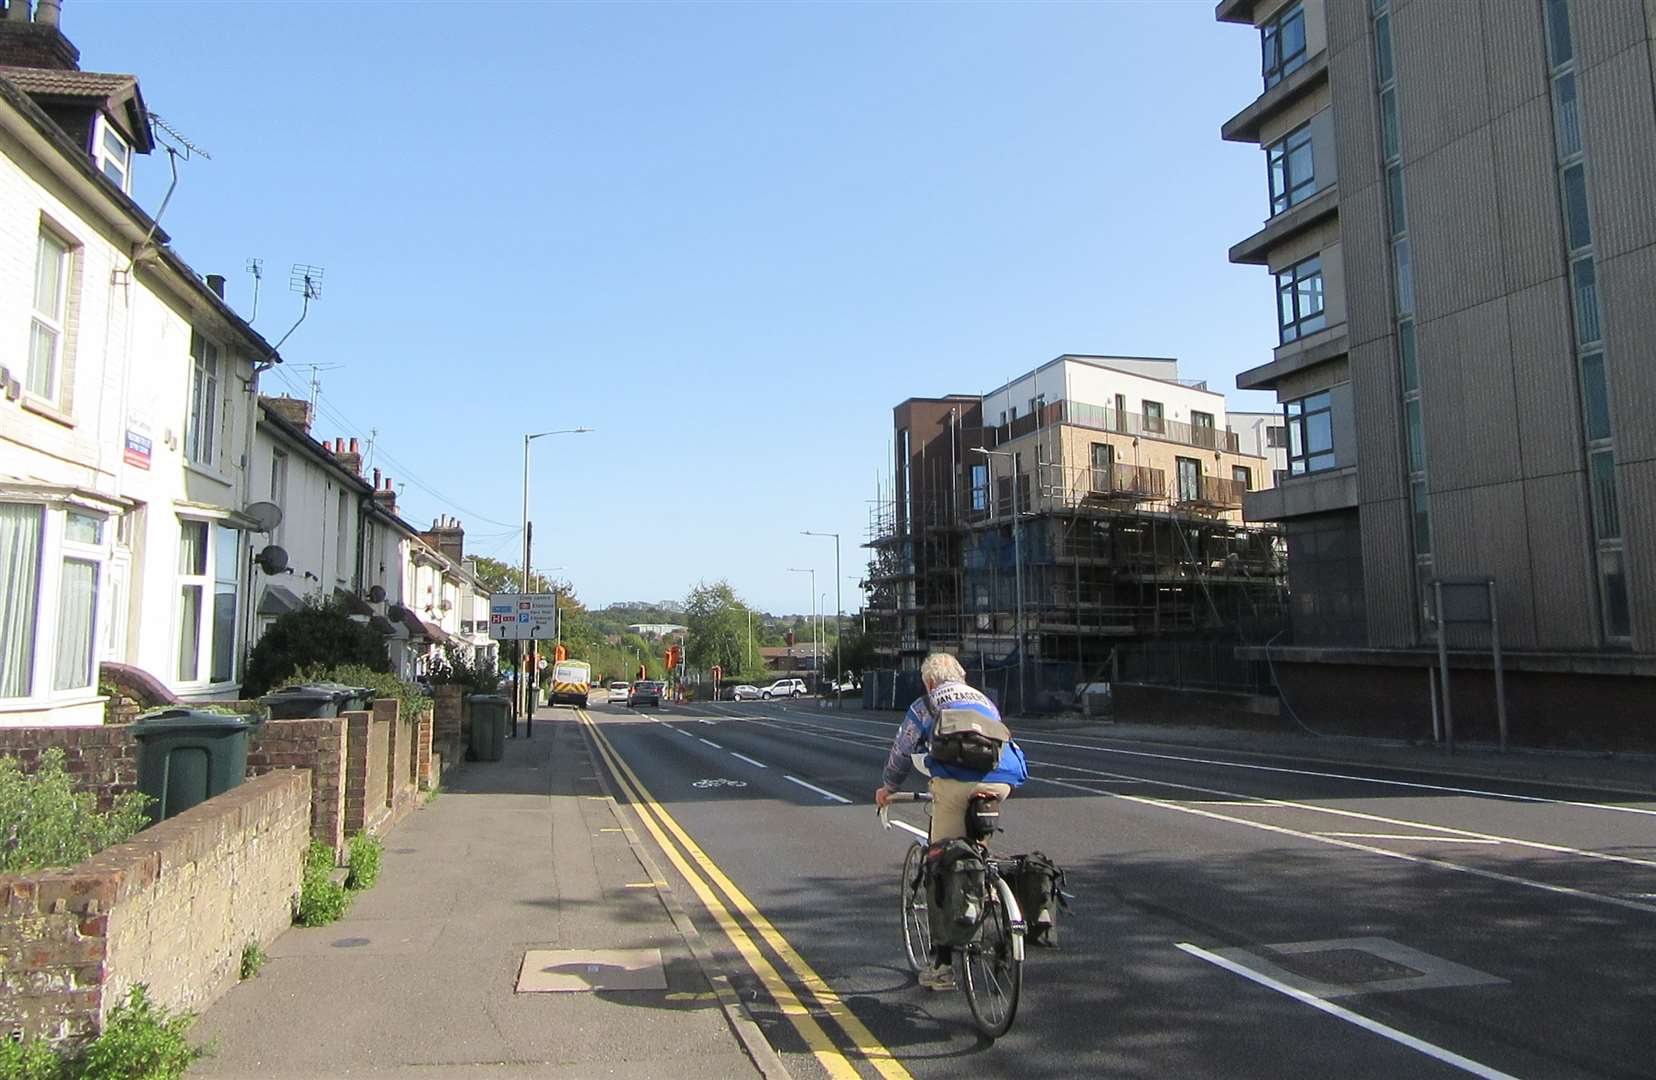 Part of the ring road was used for the short-lived cycle lane trial. Picture: Ted Prangnell